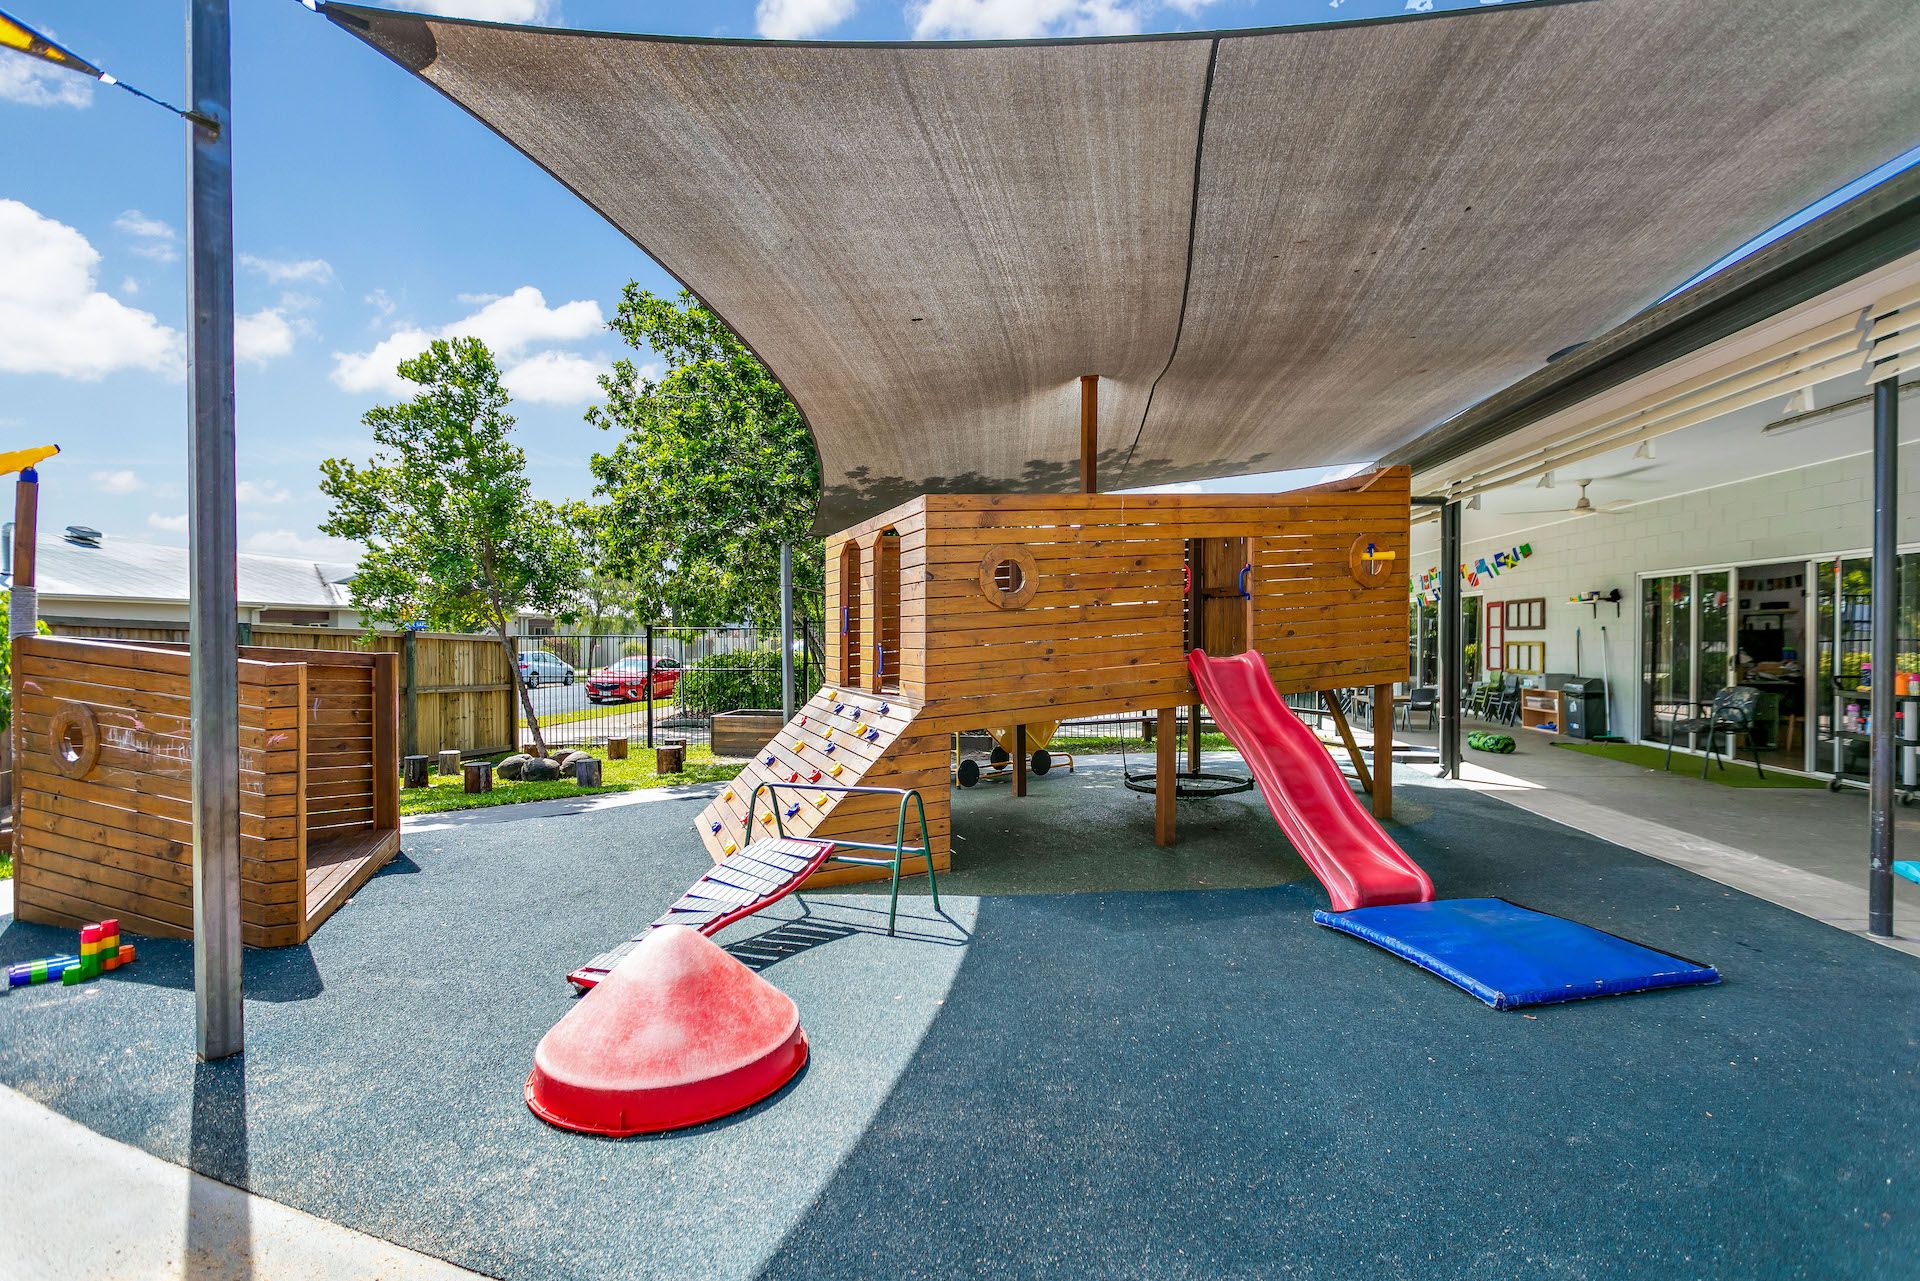 A shady playground with lots of play equipment